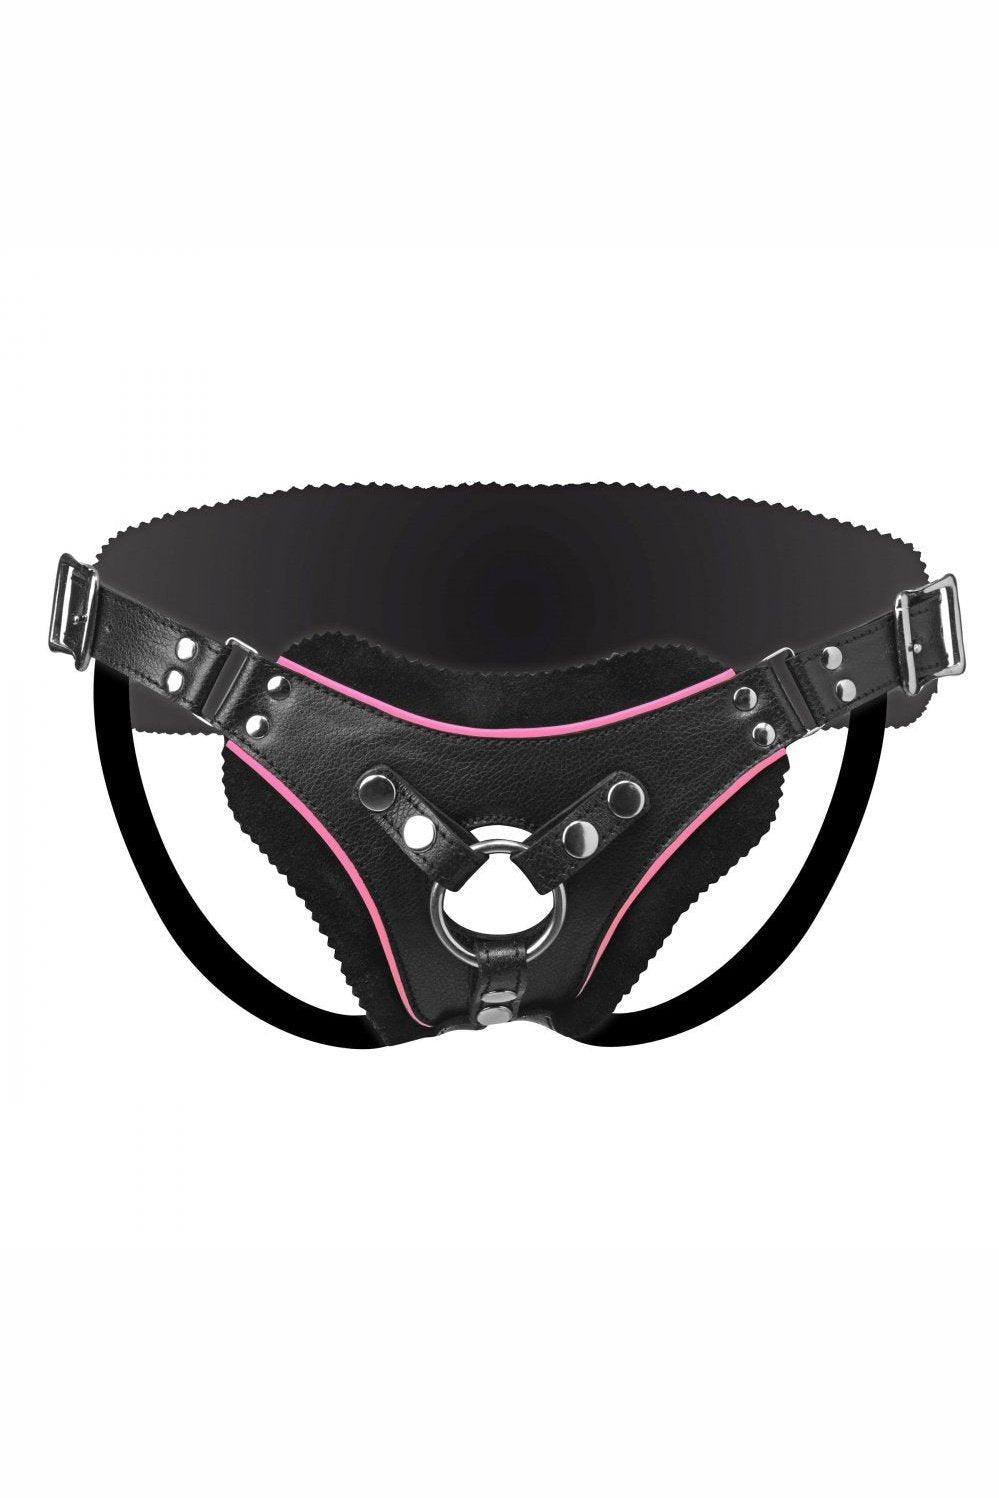 
Flamingo Low Rise Strap On Harness